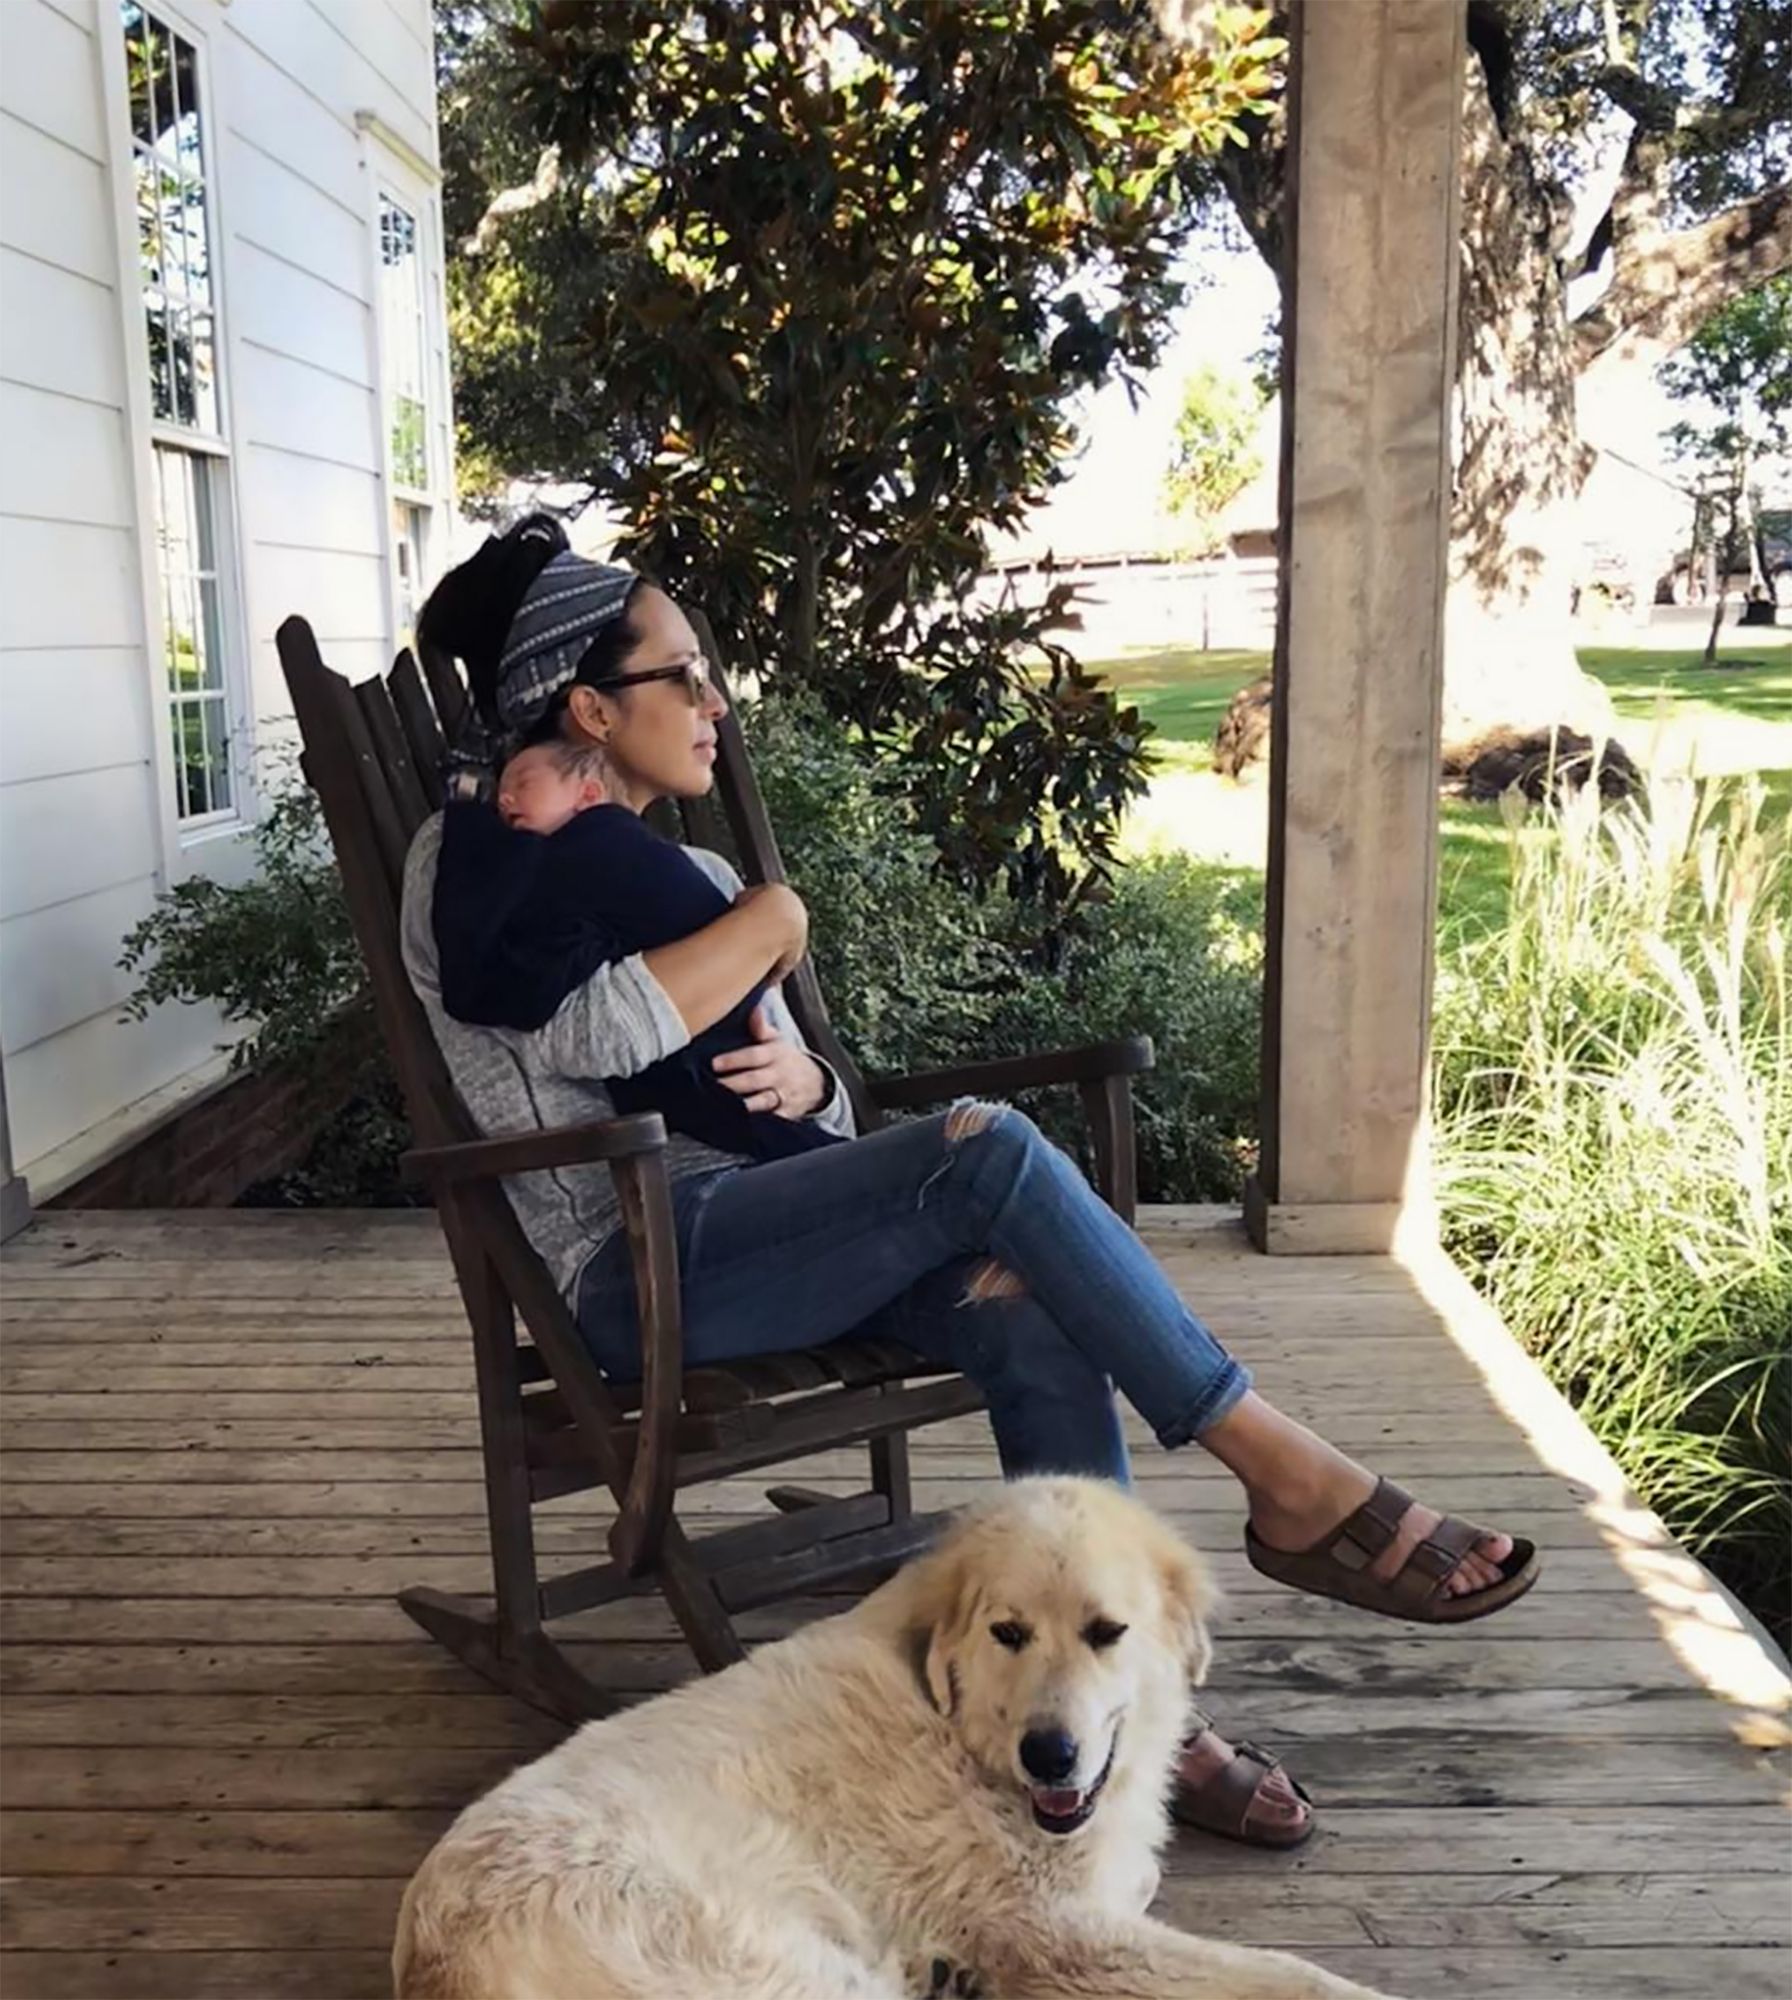 Joanna Gaines takes a moment